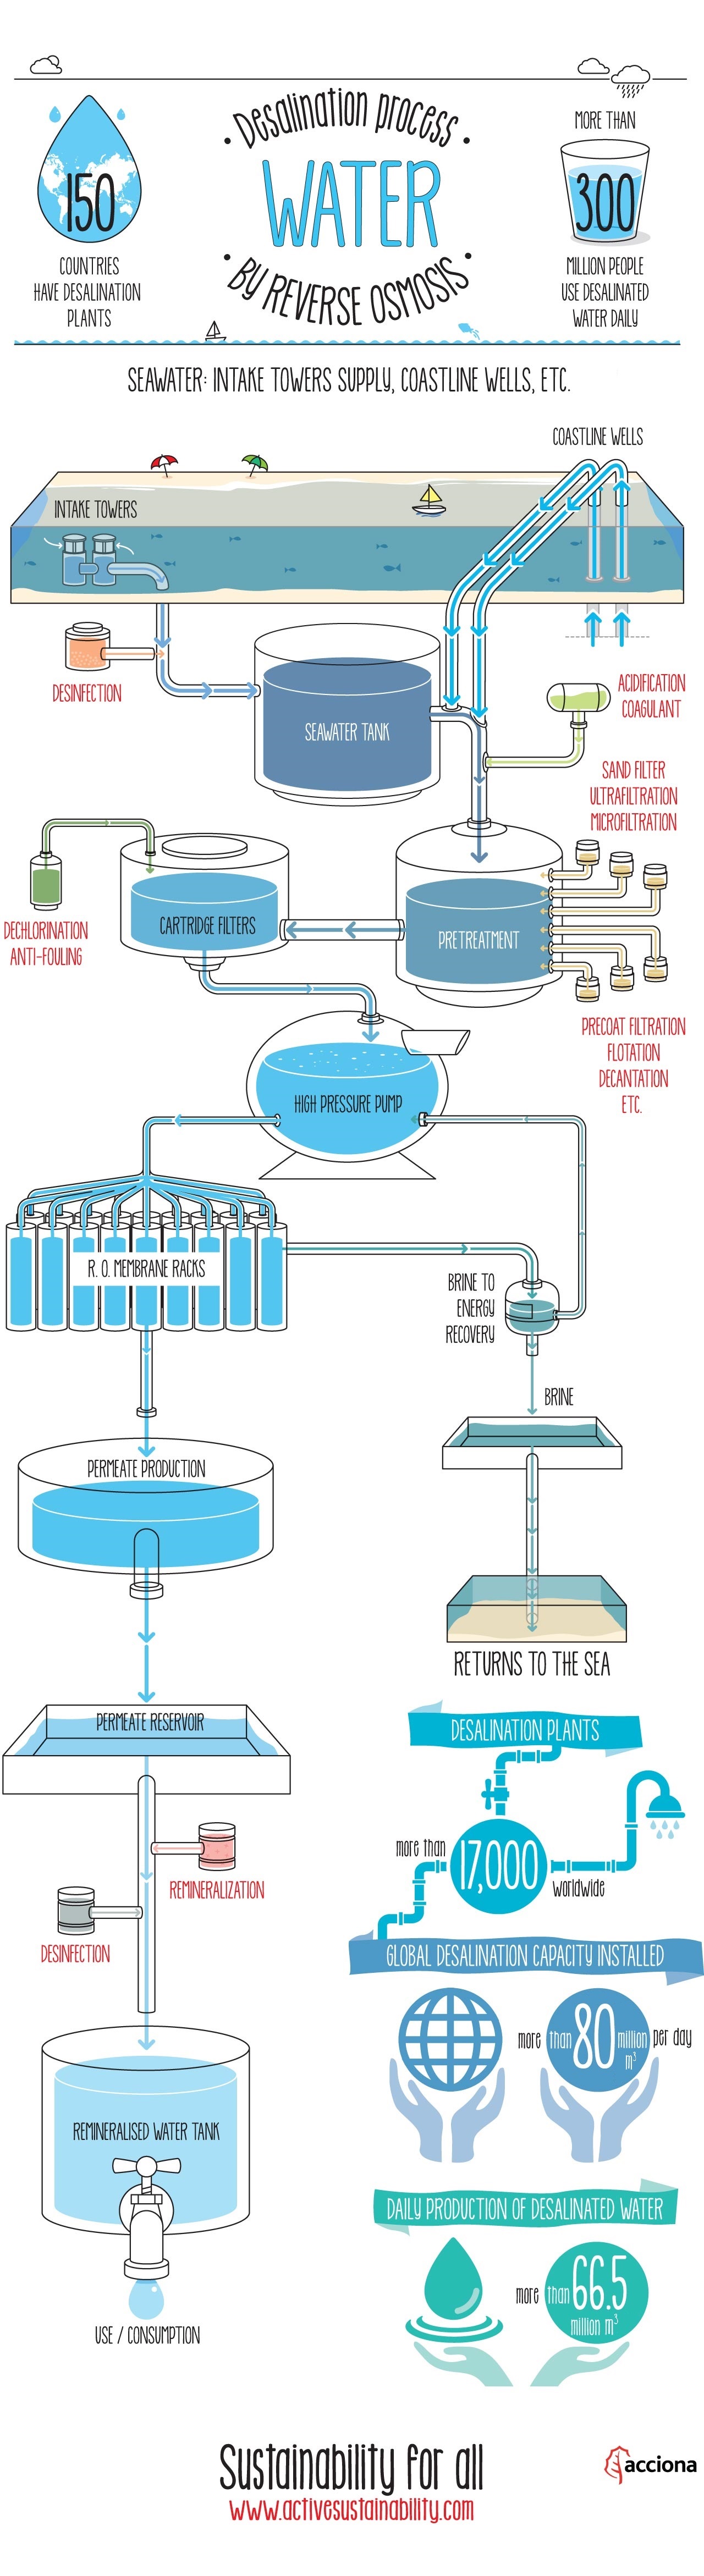 Water desalination process by reverse osmosis